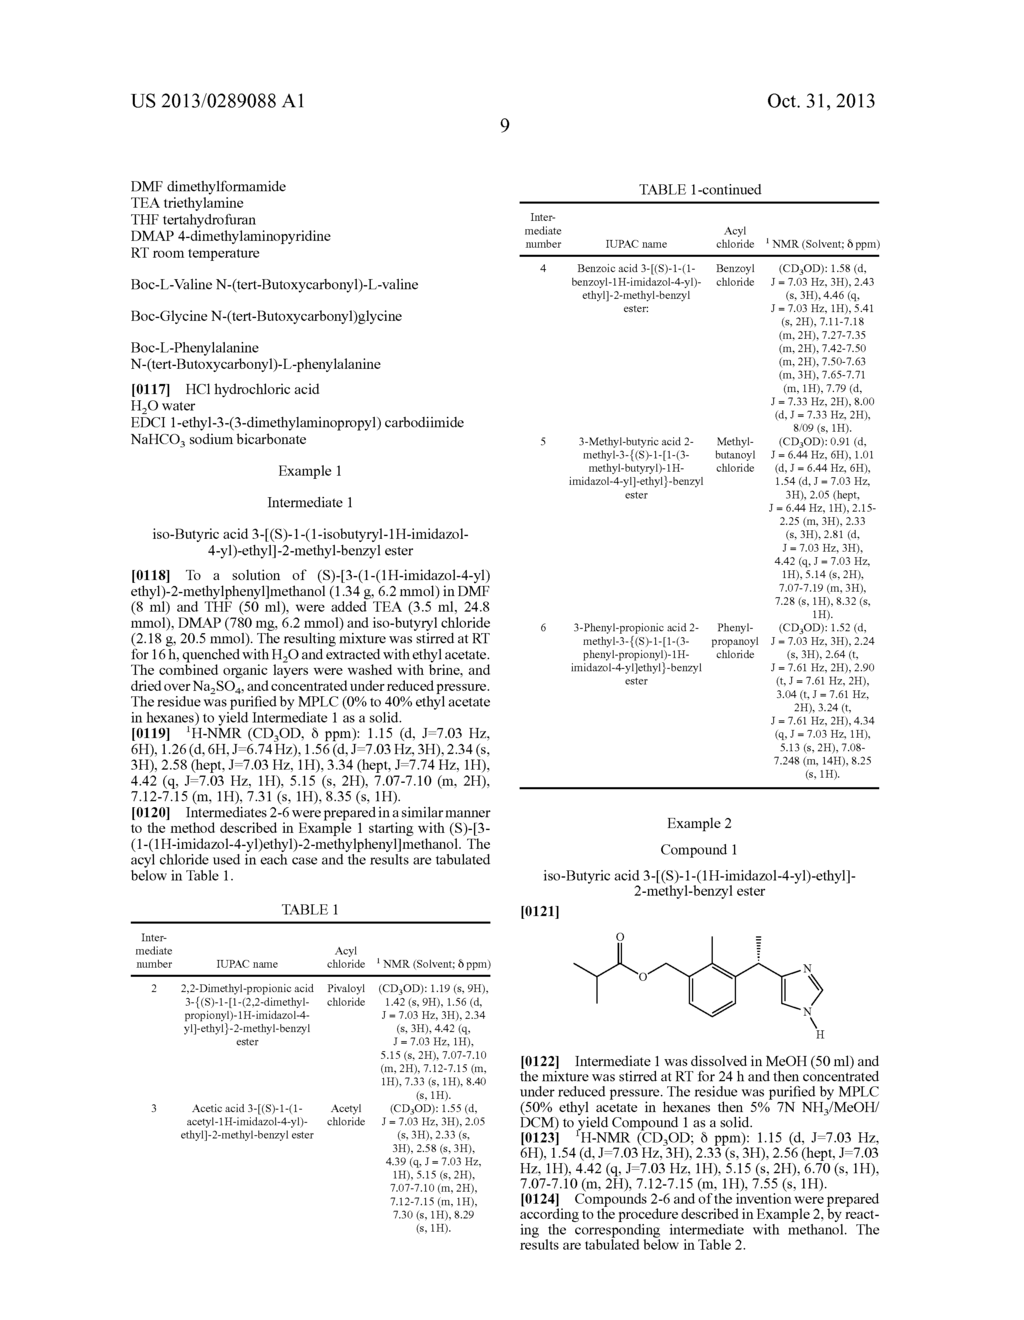 ESTER PRO-DRUGS OF [3-(1-(1H-IMIDAZOL-4-YL)ETHYL)-2-METHYLPHENYL] METHANOL     FOR LOWERING INTRAOCULAR PRESSURE - diagram, schematic, and image 11